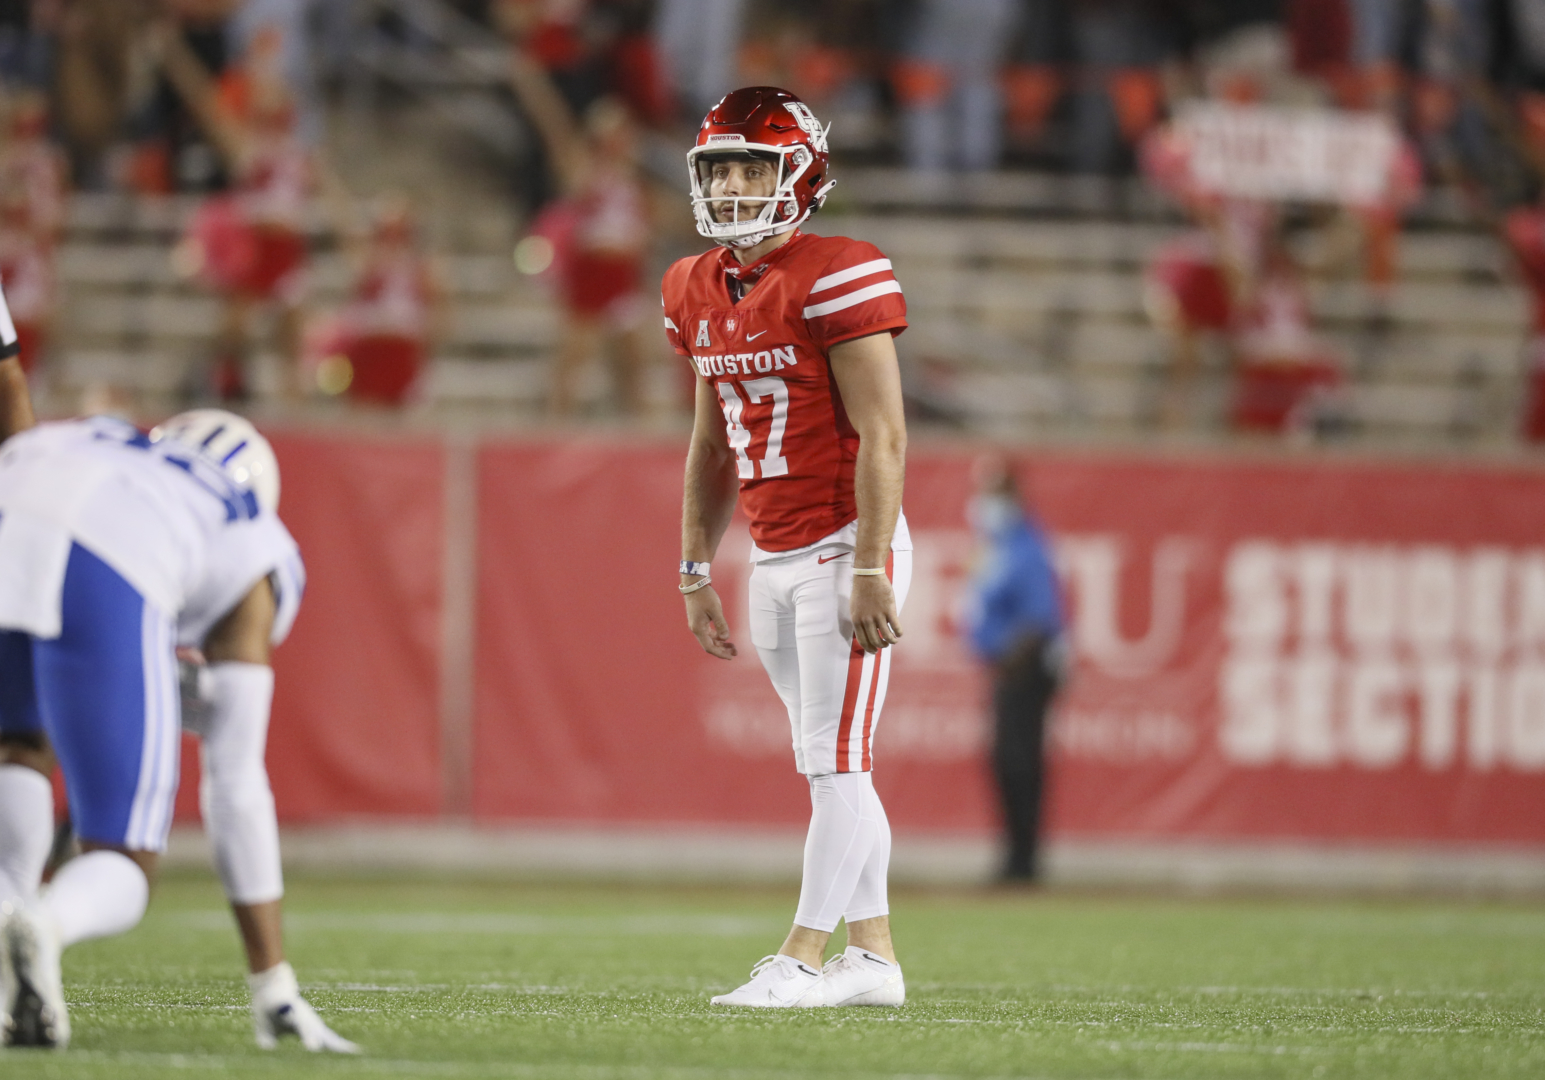 Senior kicker Dalton Witherspoon was named AAC Special Teams Player of the Week as he made three field goals, including a career-long 53-yarder, against Navy | Courtesy of UH Athletics